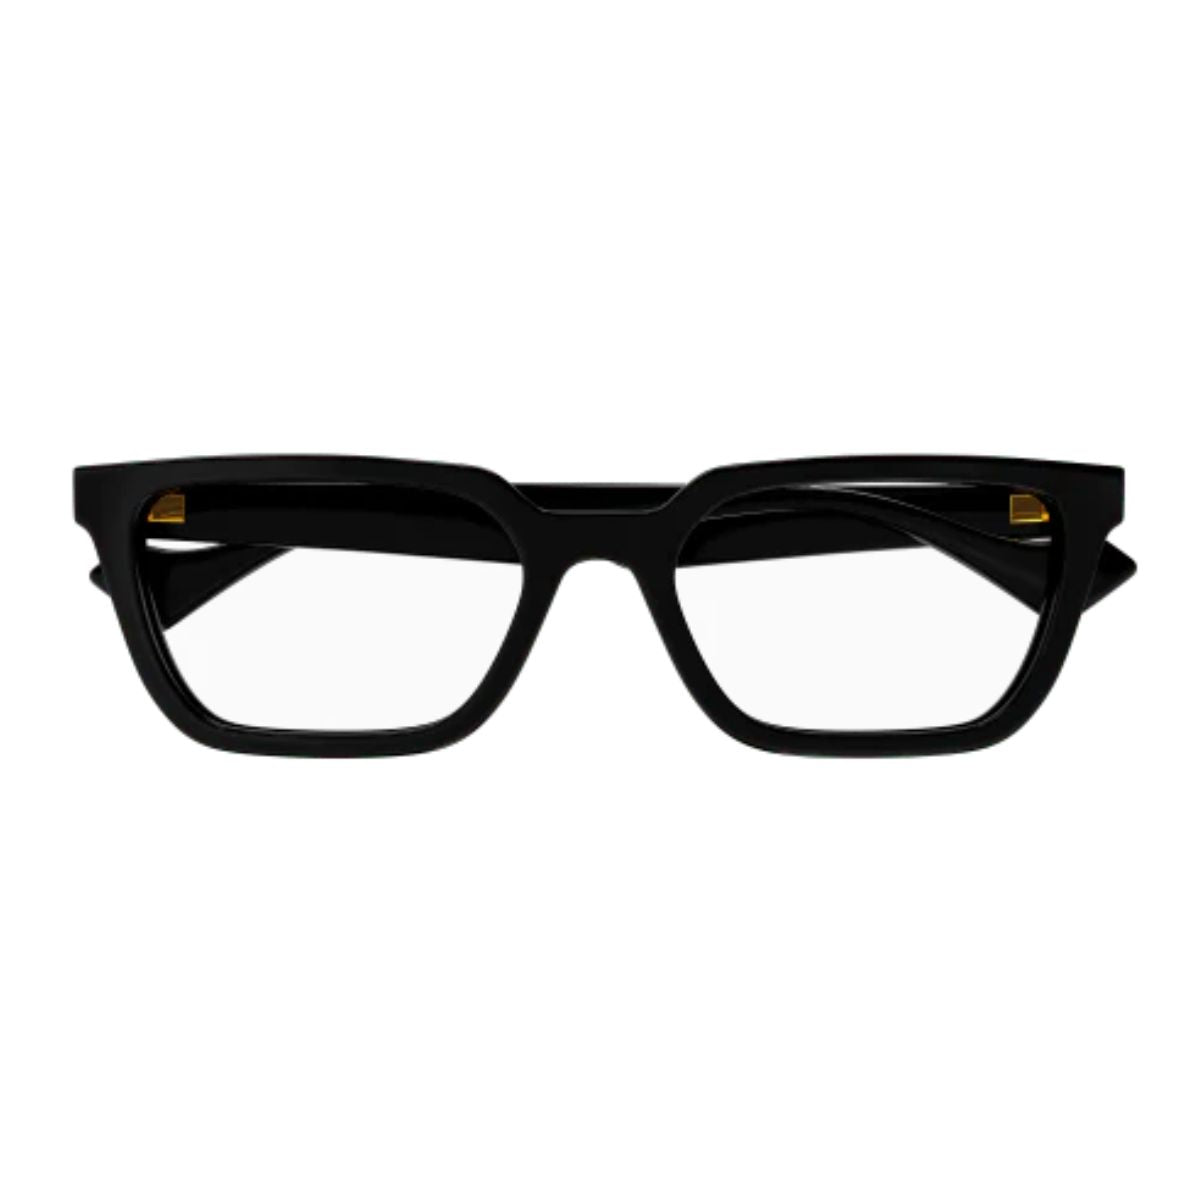 "Stylish Gucci 1539O 001 Frames for Men - Optorium's Collection"